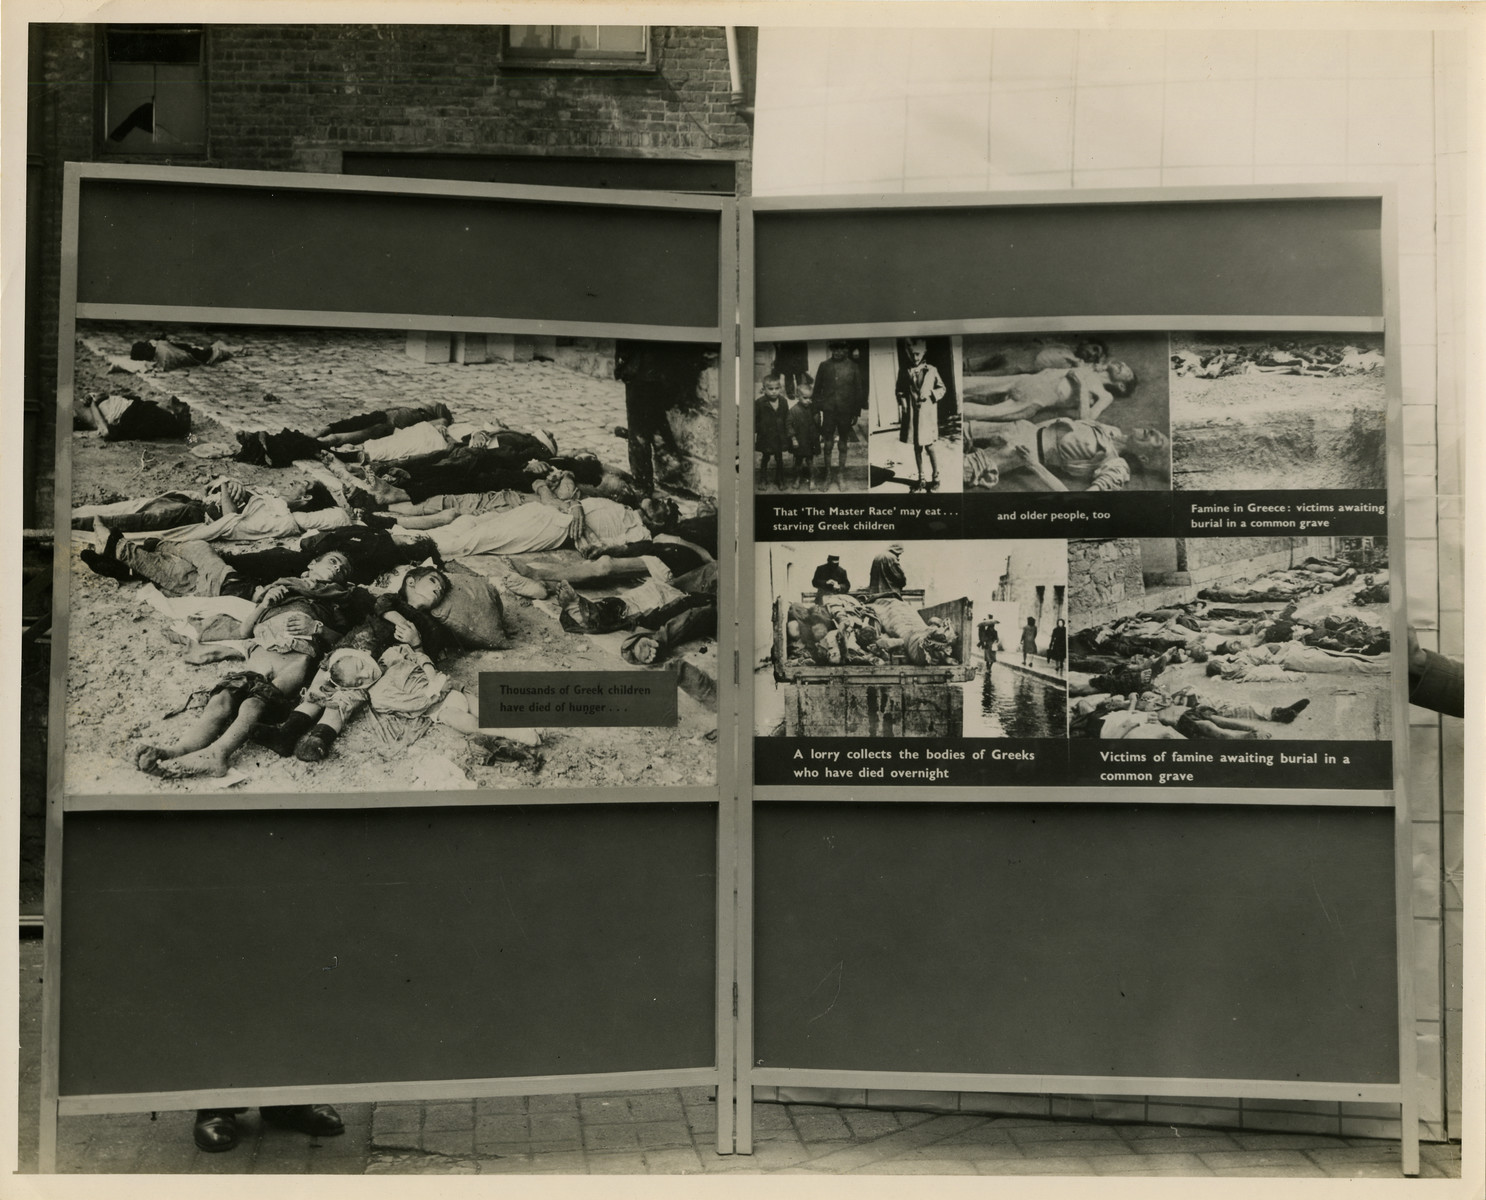 Panel from a 1944 exhibition in London, England, entitled "Germany- the Evidence" showing Greek victims of the Nazi Regime. 

The panel shows pictures of emaciated Greek victims, both young and old, who died due to famine. 

The back of the photo reads "British Official Photograph; Distrbuted by the Ministry of Information. D. ; The Evil We Fight.; Ministry of Information Exhibition priduced by Display &Exhibitions Division for show all over Great Britain.; Display panel"